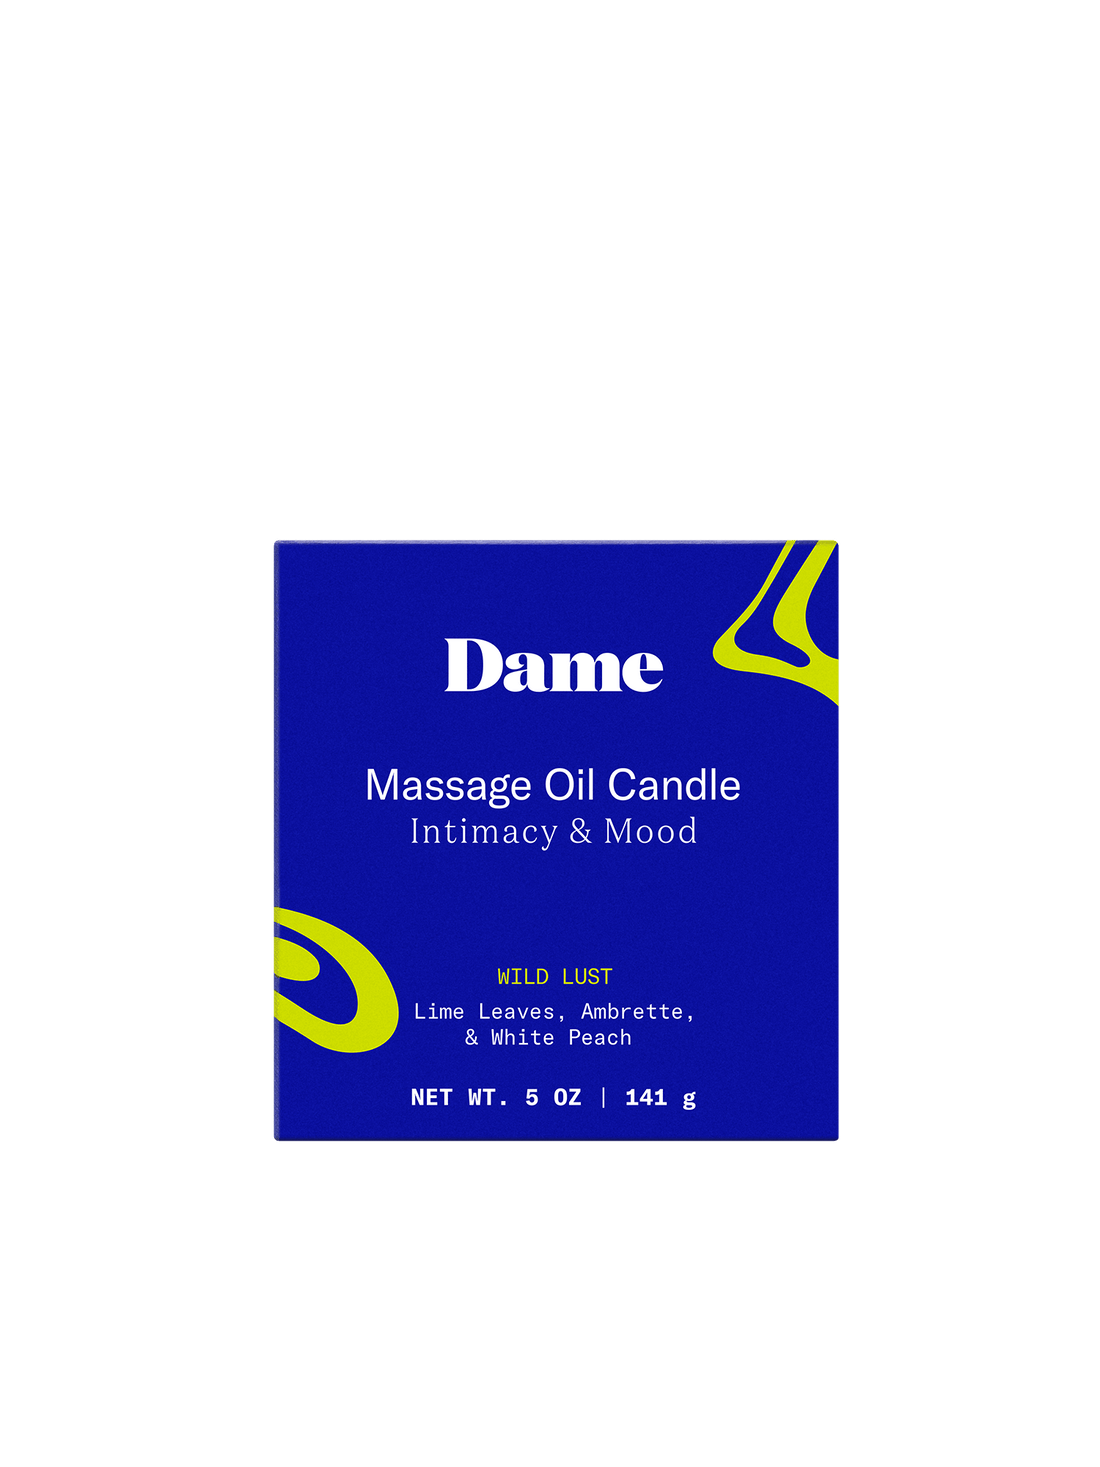 Dame Massage Oil Candle